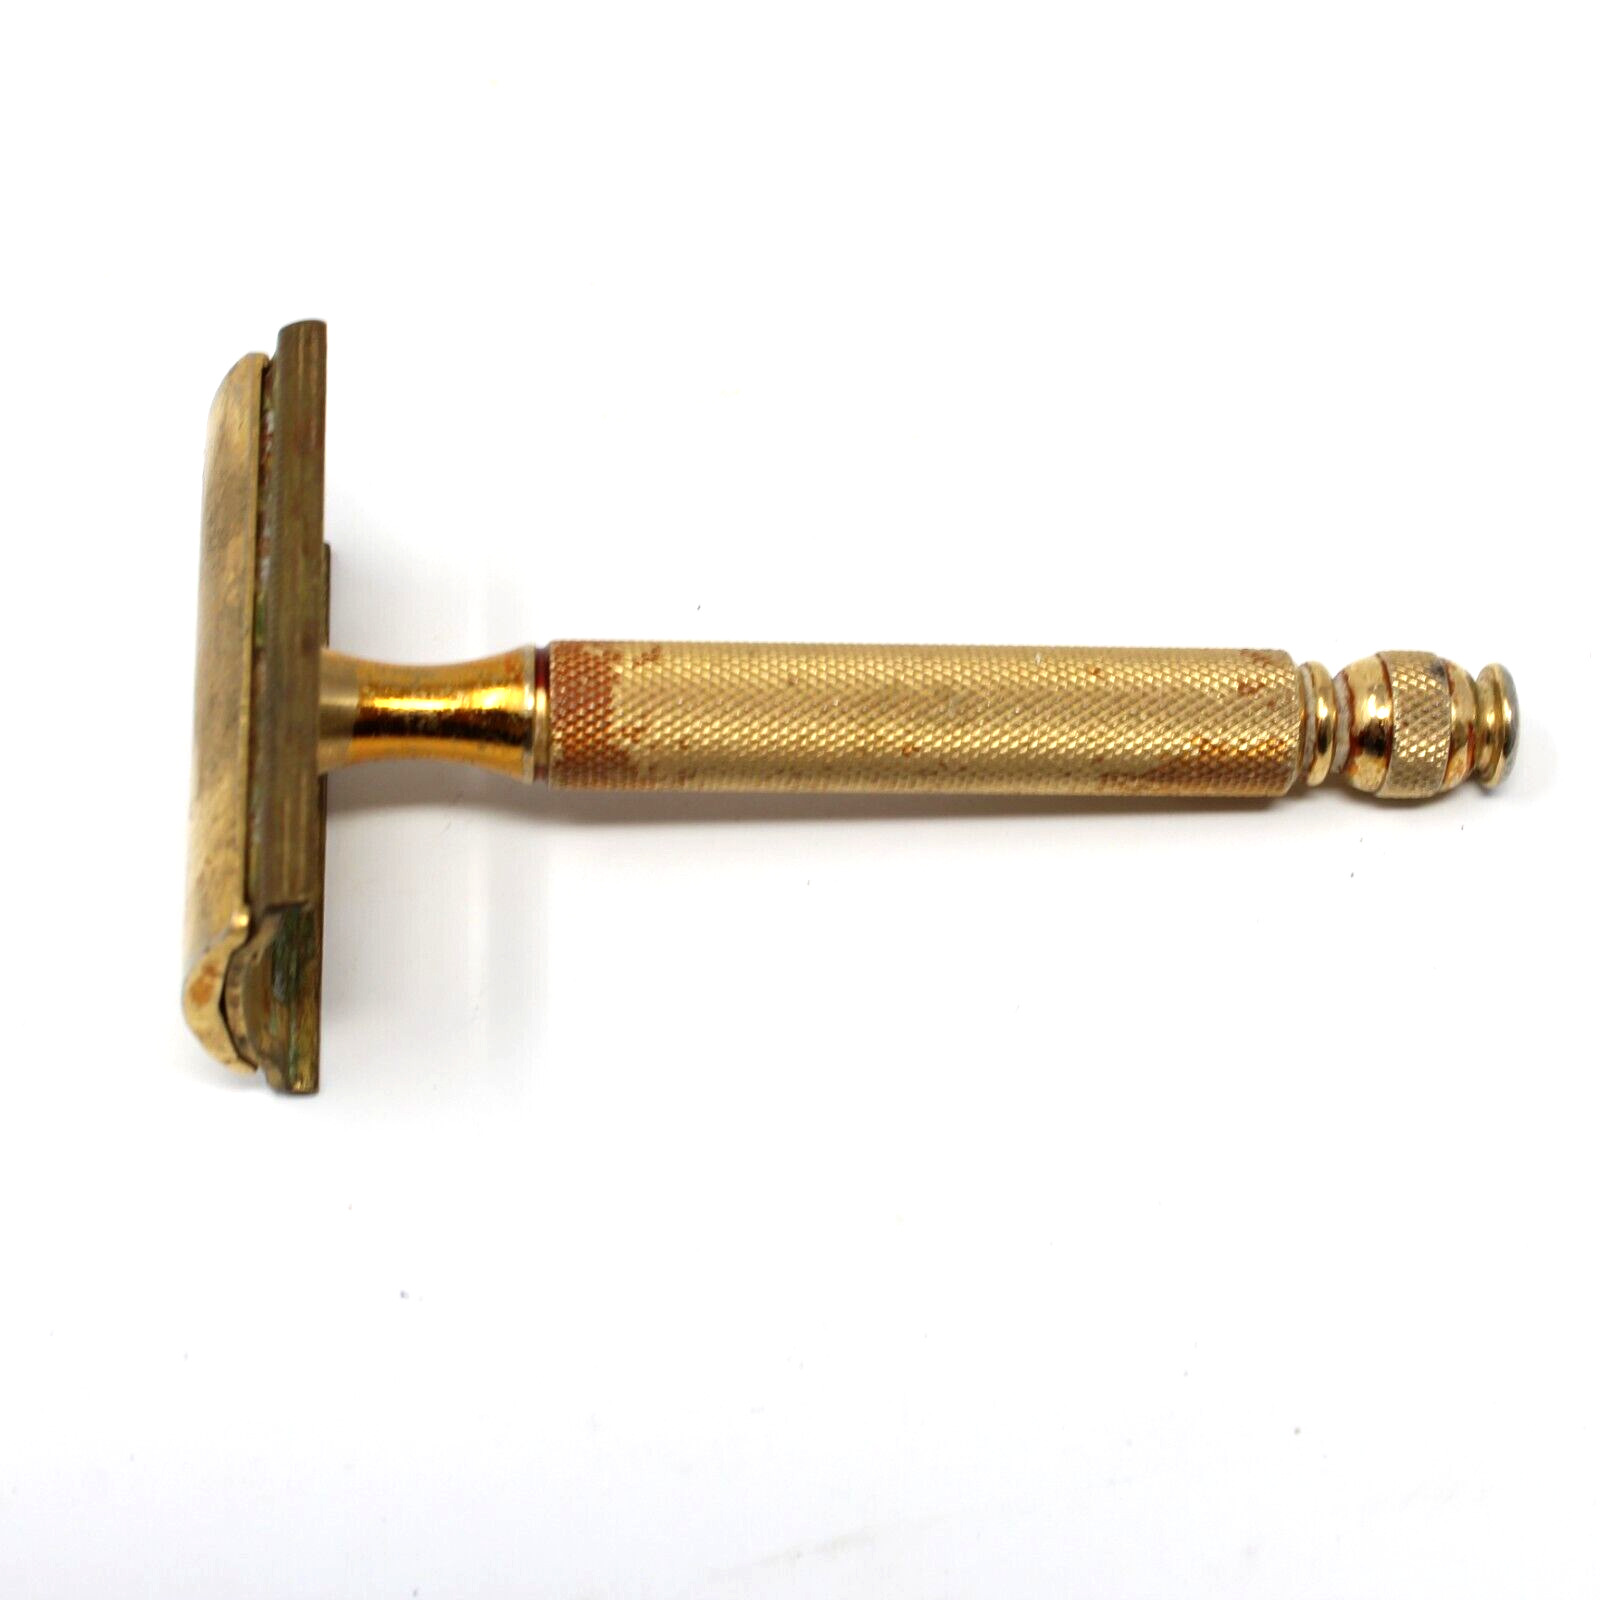 Vintage Gillette Ball End Tech Gold Tone Double Edge Safety Razor Made in USA